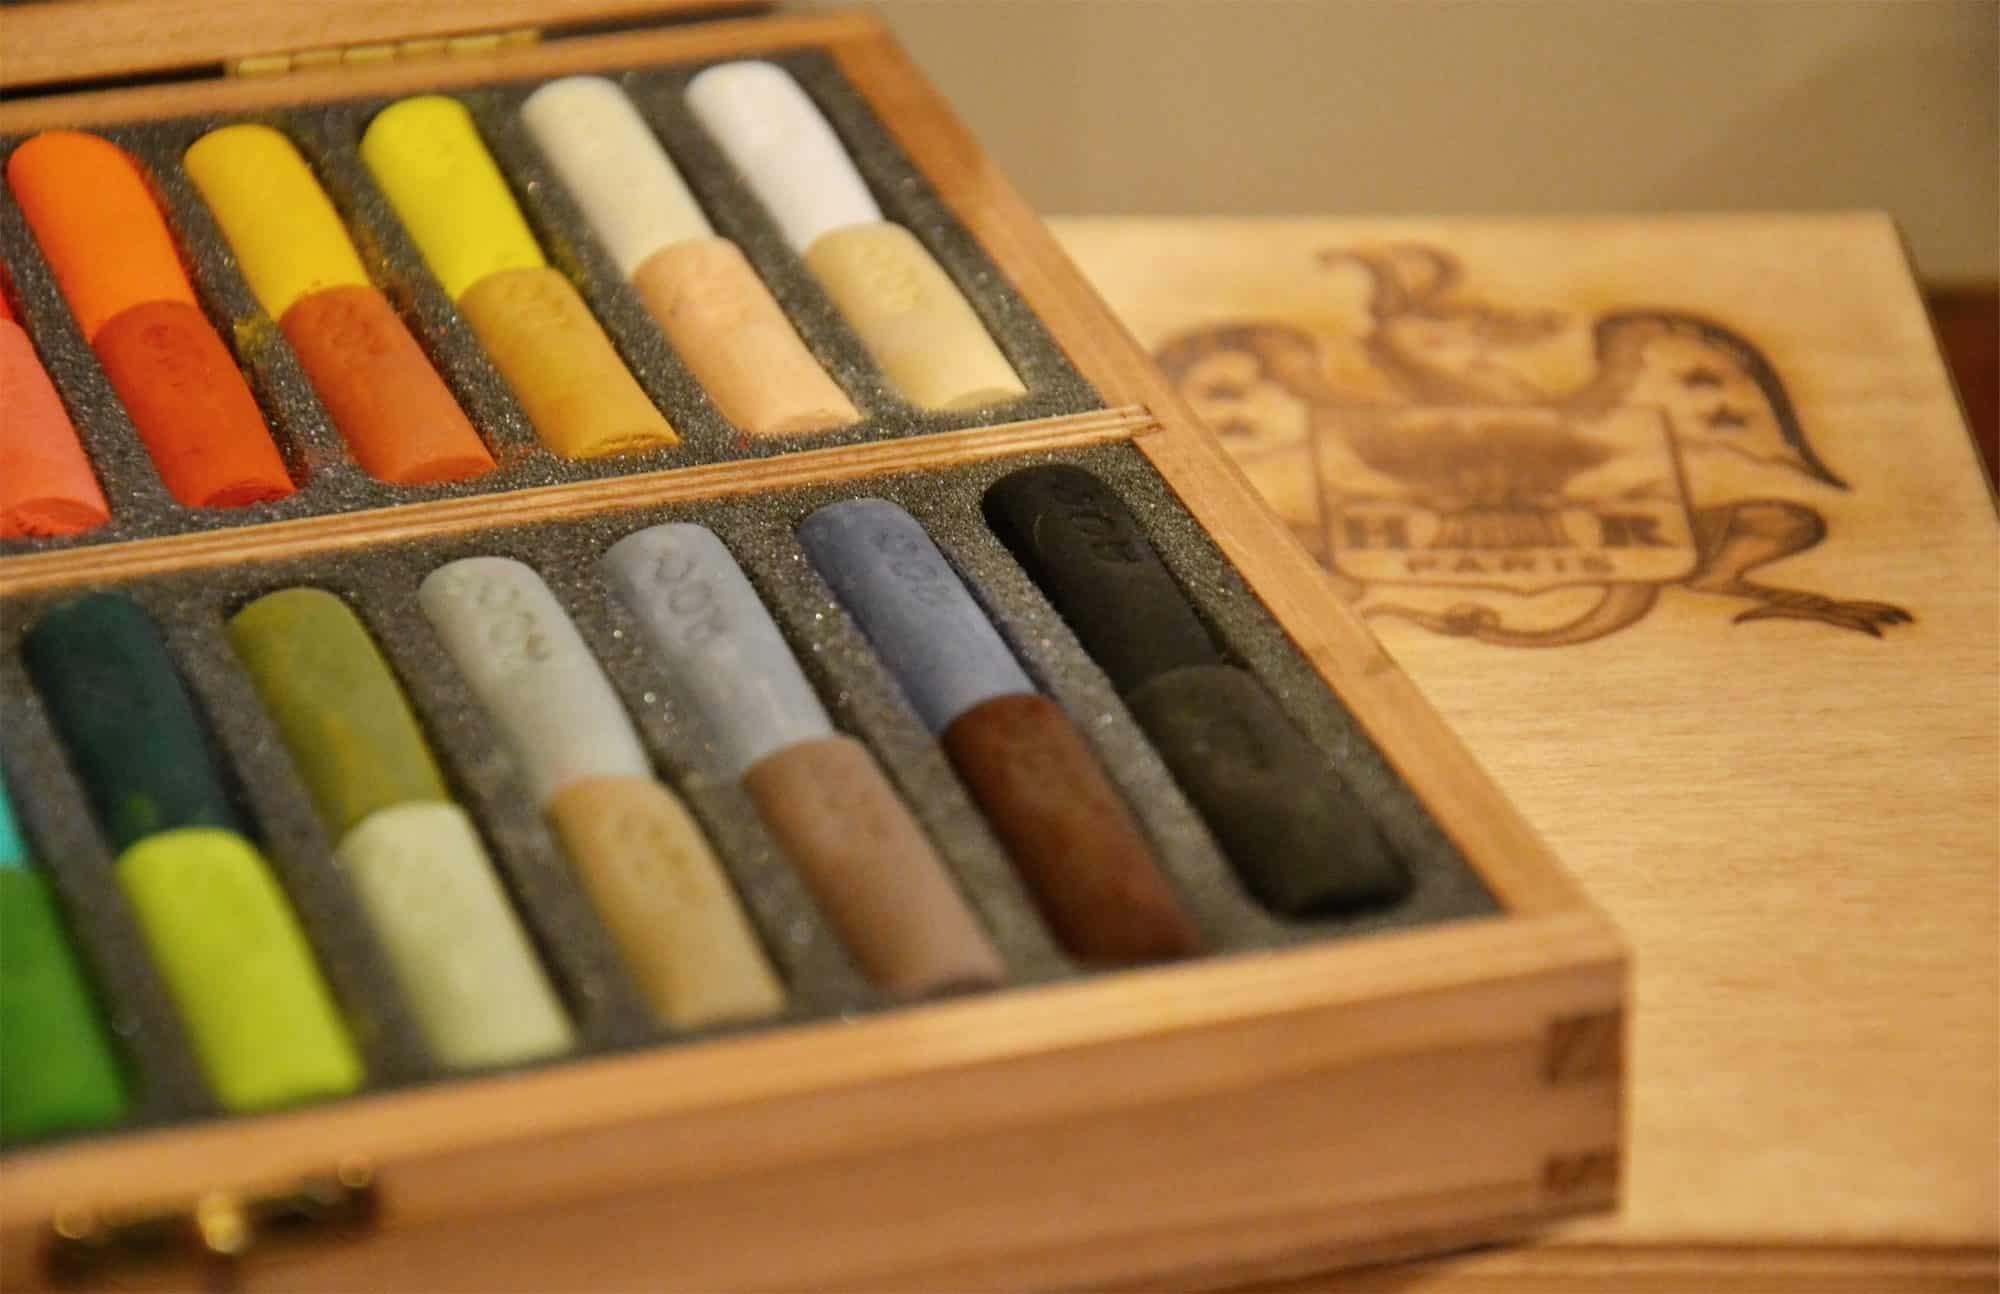 The Maison du Pastel art store in Paris sells the most beautiful colors of pastels all traditionally made, like this open wooden box of yellows, grays and oranges.